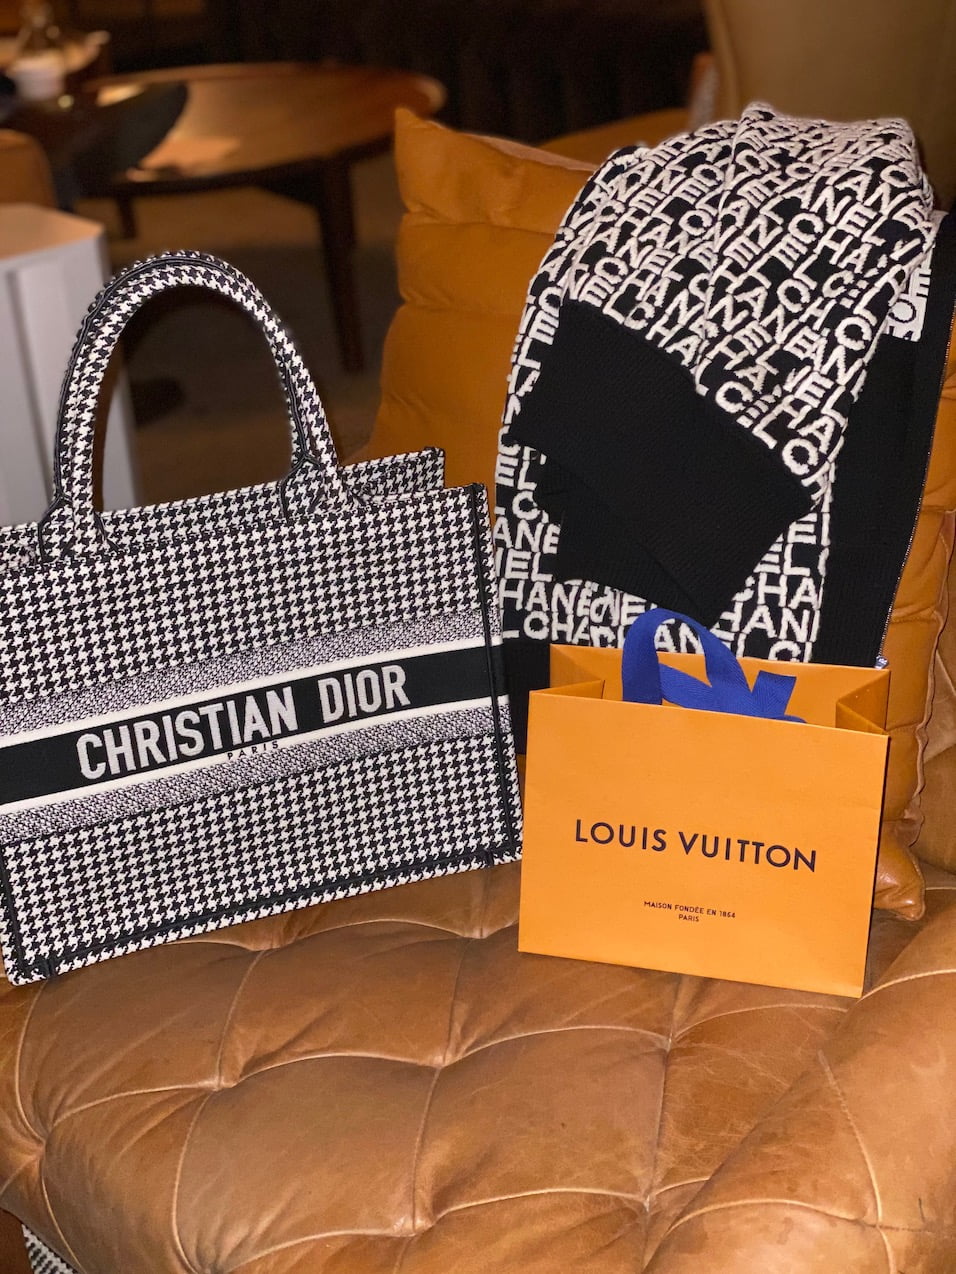 What's Up With Louis Vuitton's Twist Bag This Season? - PurseBop